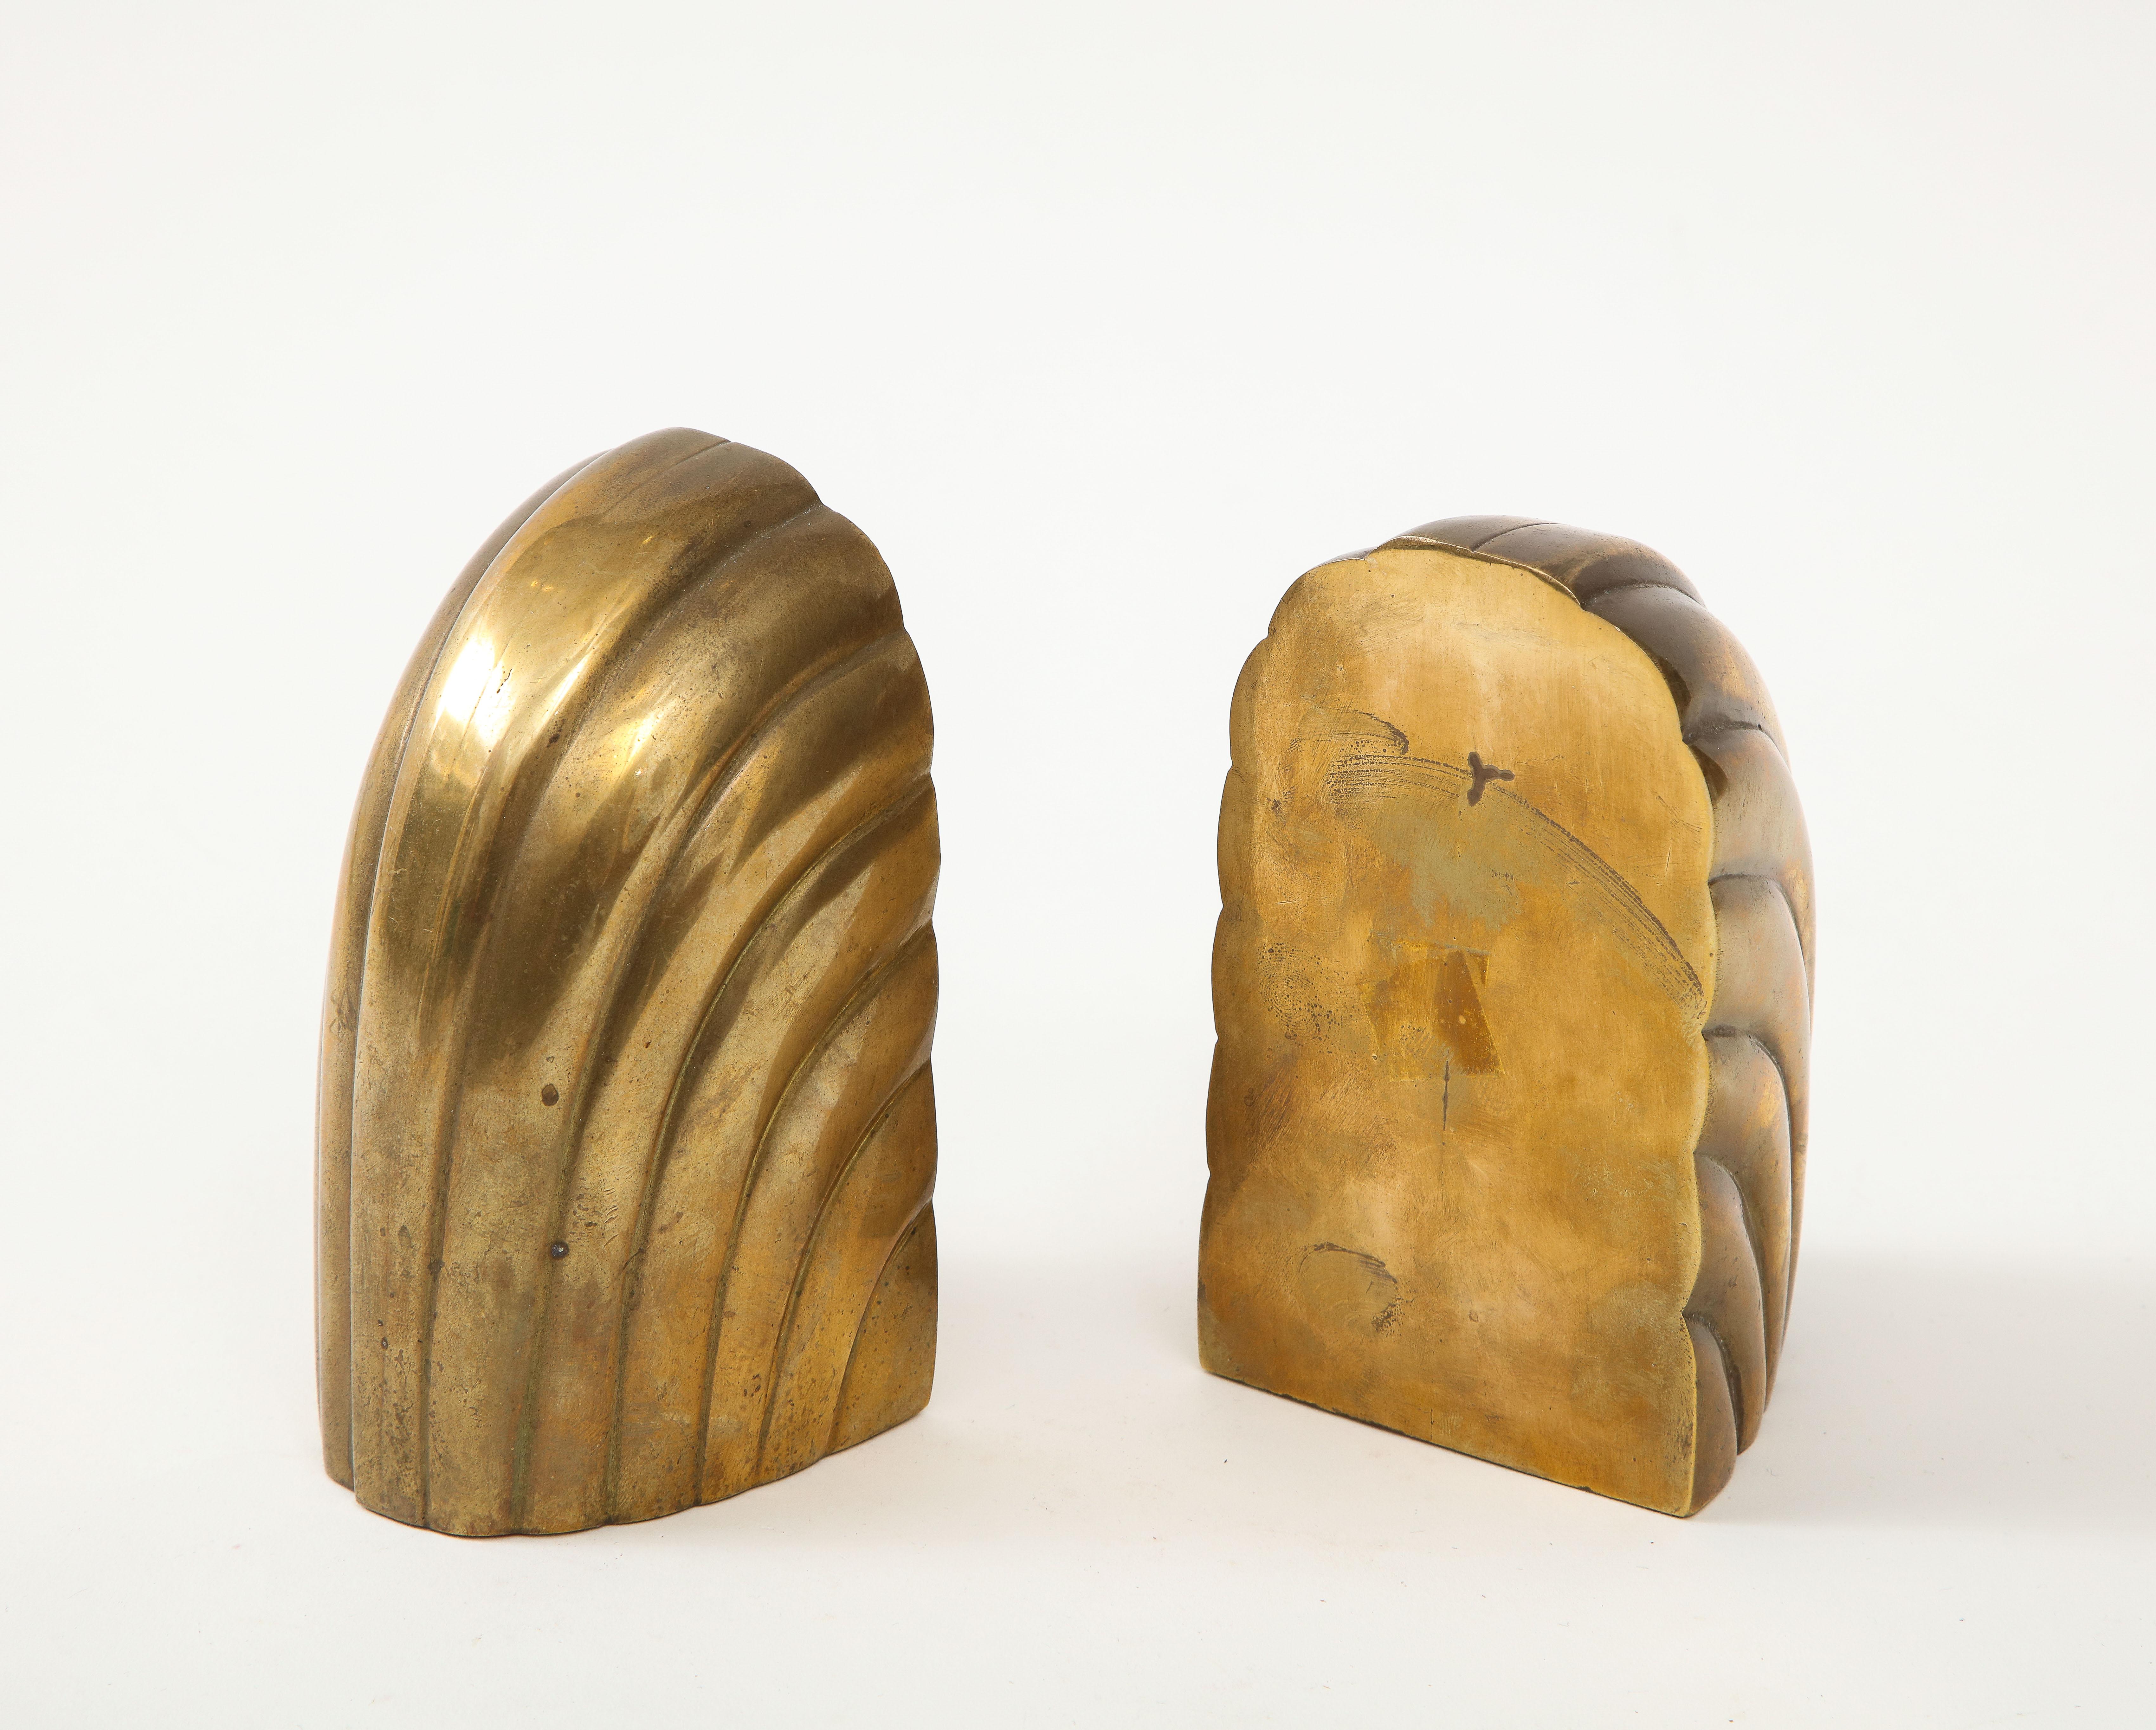 20th Century Art Deco Revival Aged Brass Bookends